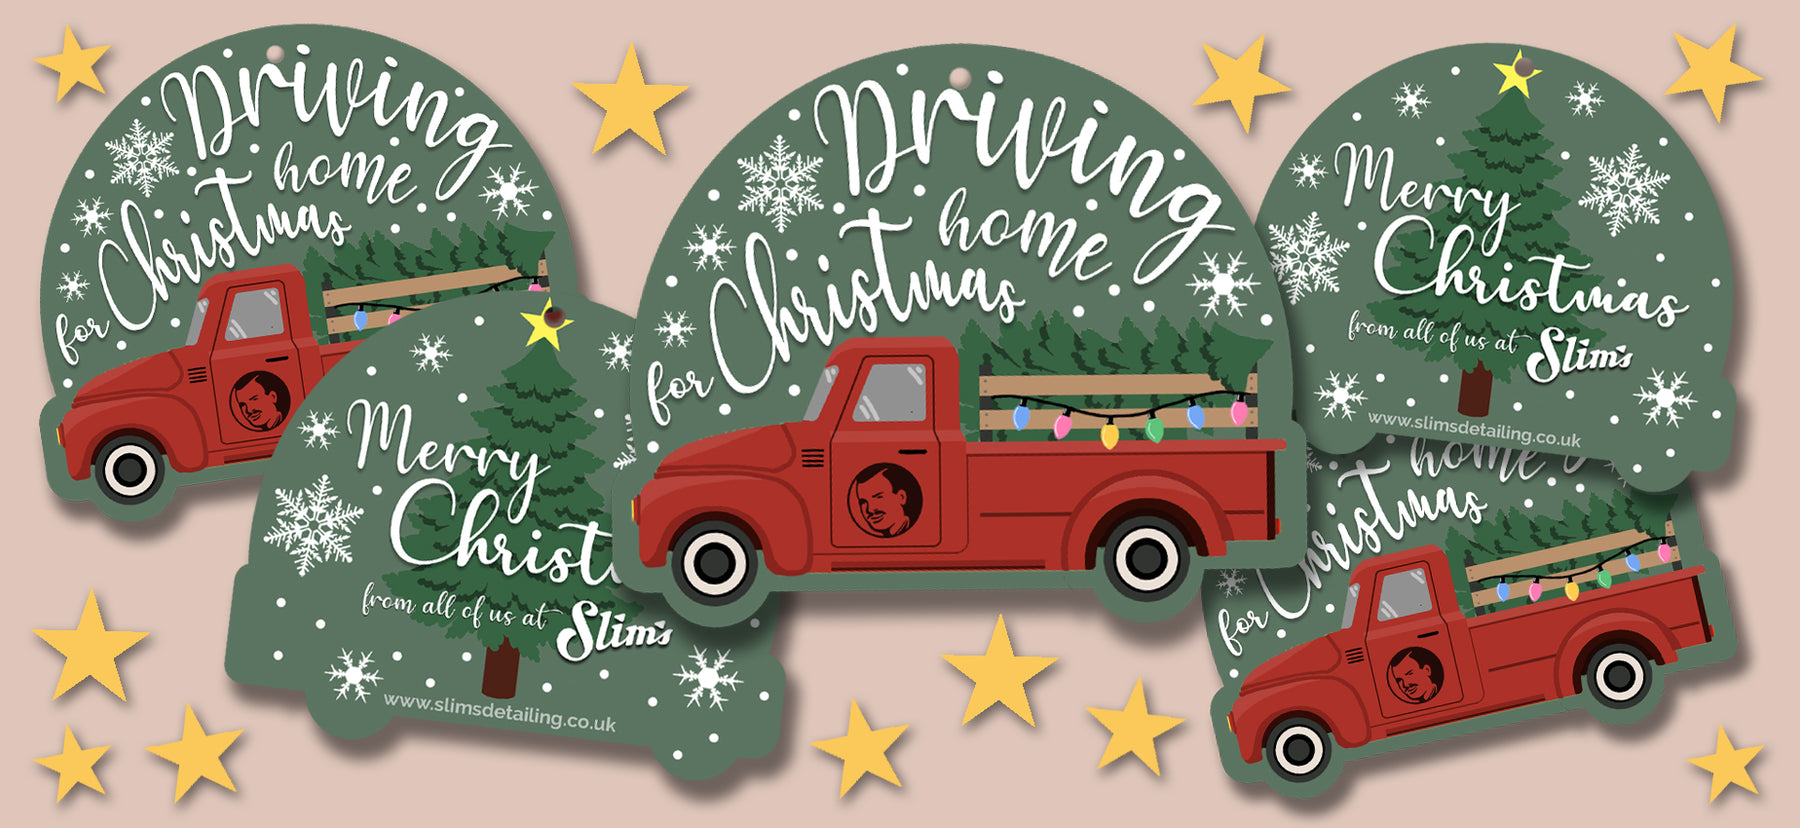 Get Your FREE Christmas Air Freshener